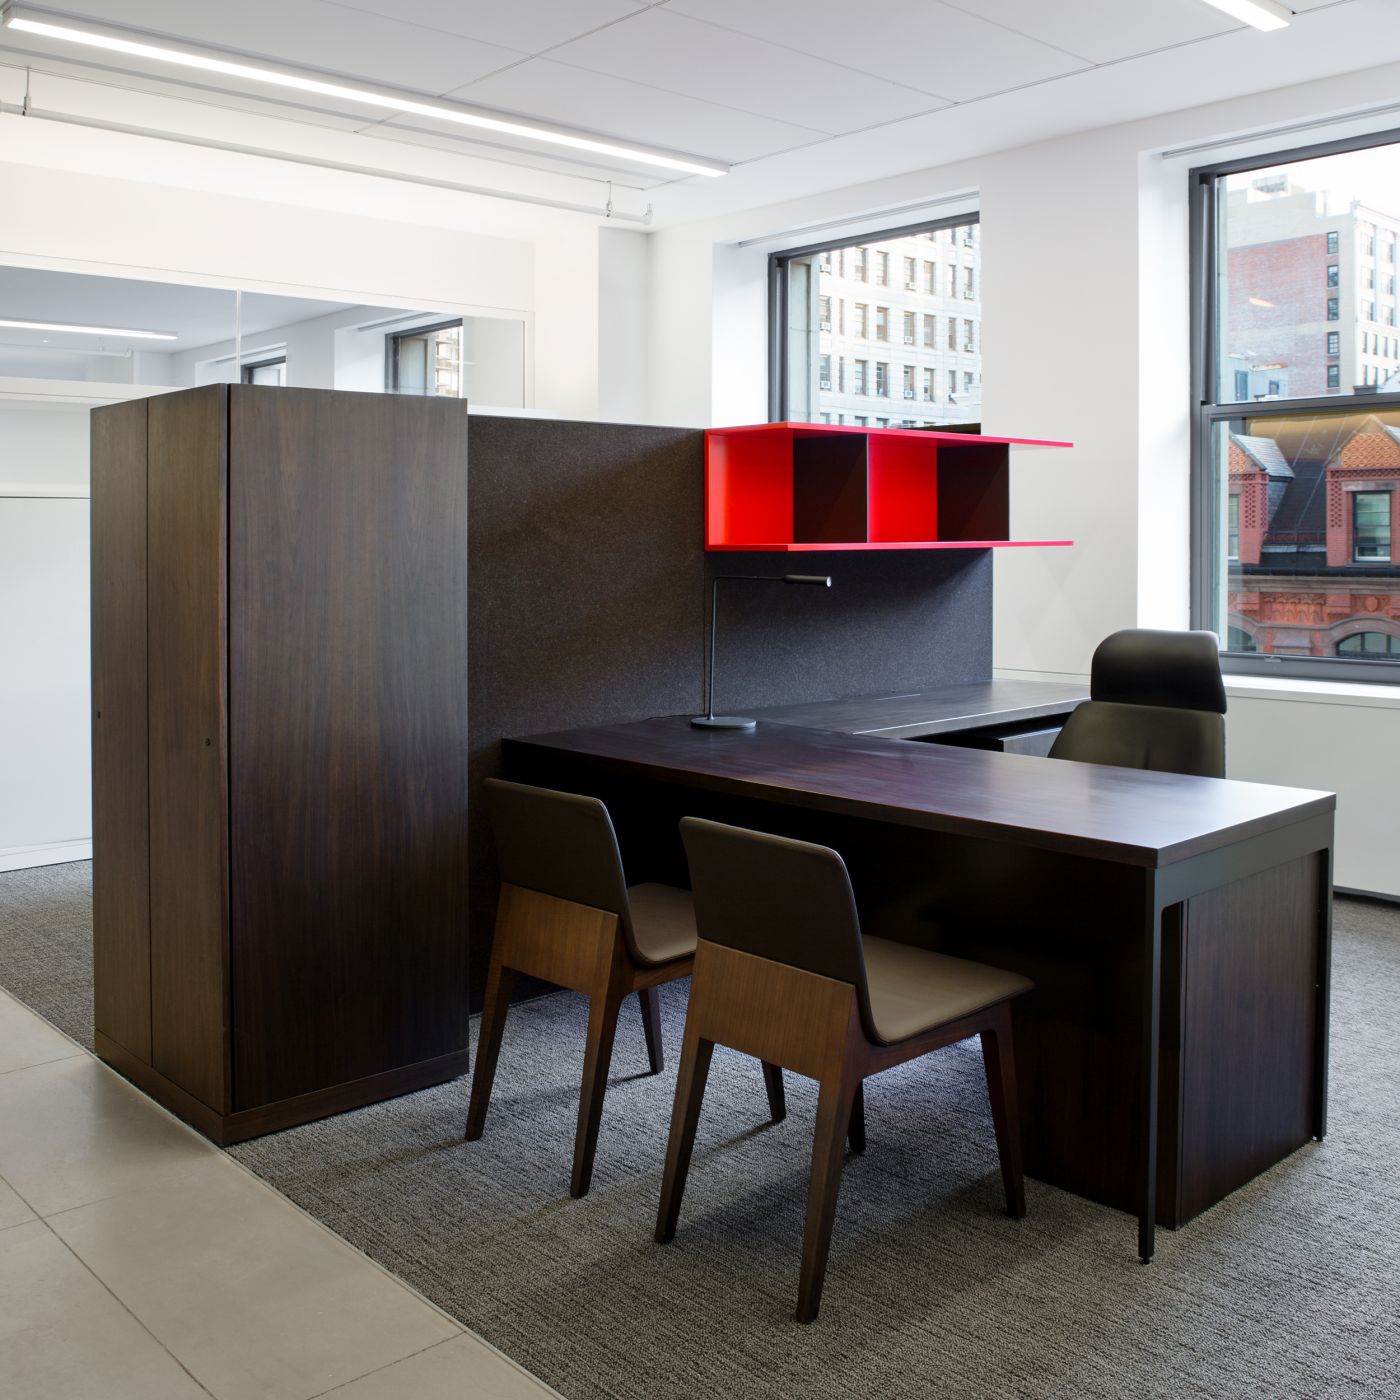 IMG utilizes private office layouts in an open office environment.